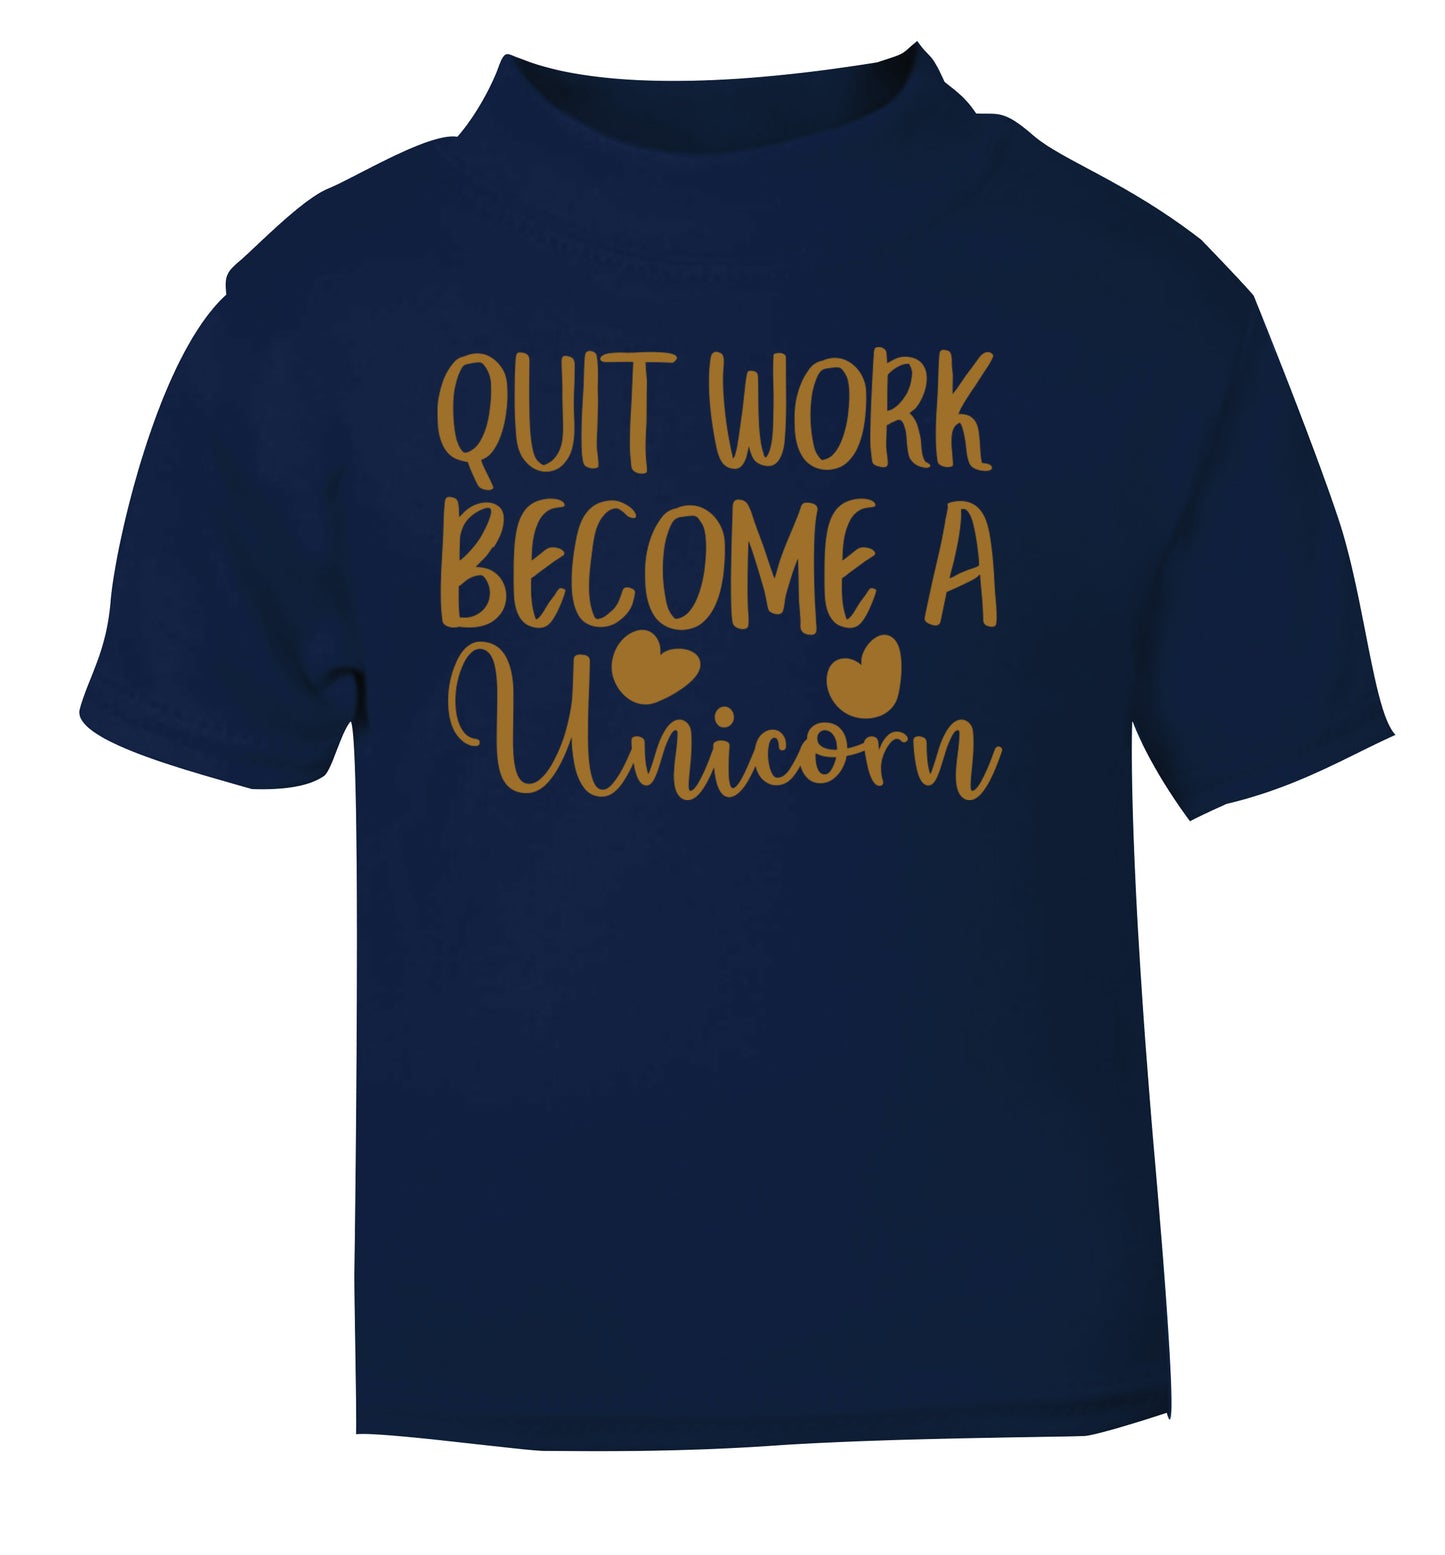 Quit work become a unicorn navy Baby Toddler Tshirt 2 Years